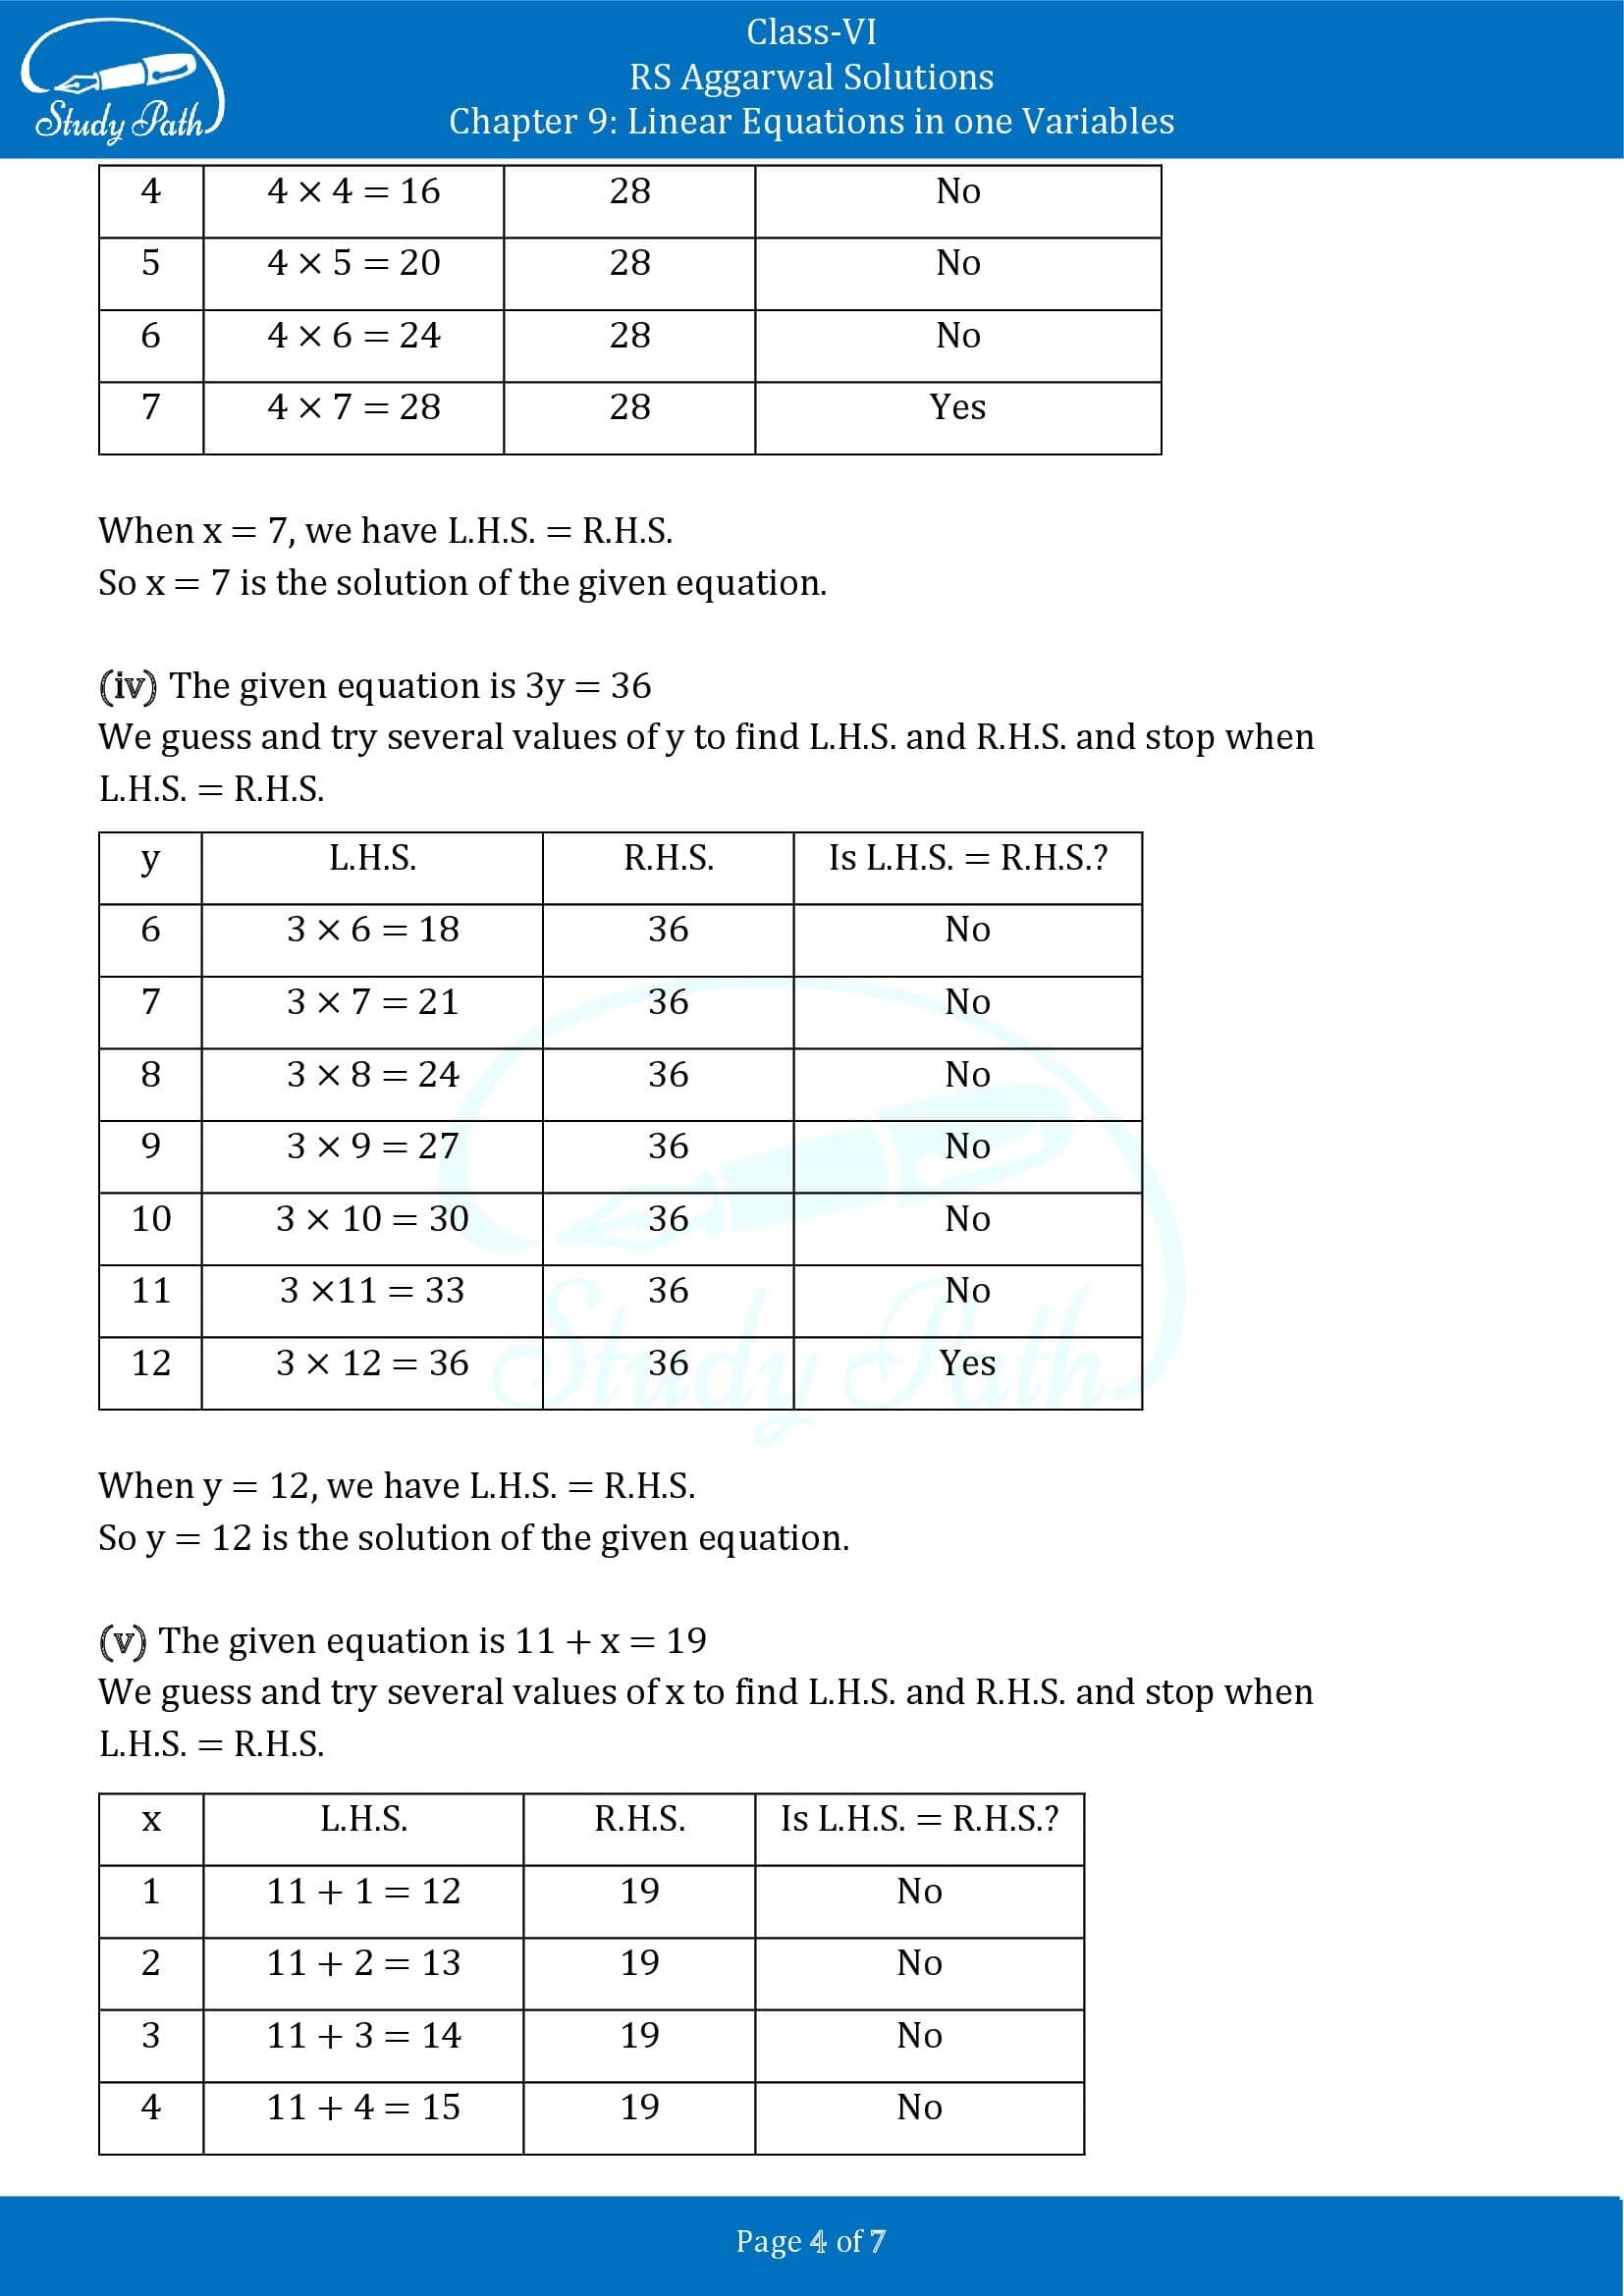 RS Aggarwal Solutions Class 6 Chapter 9 Linear Equations in One Variable Exercise 9A 00004